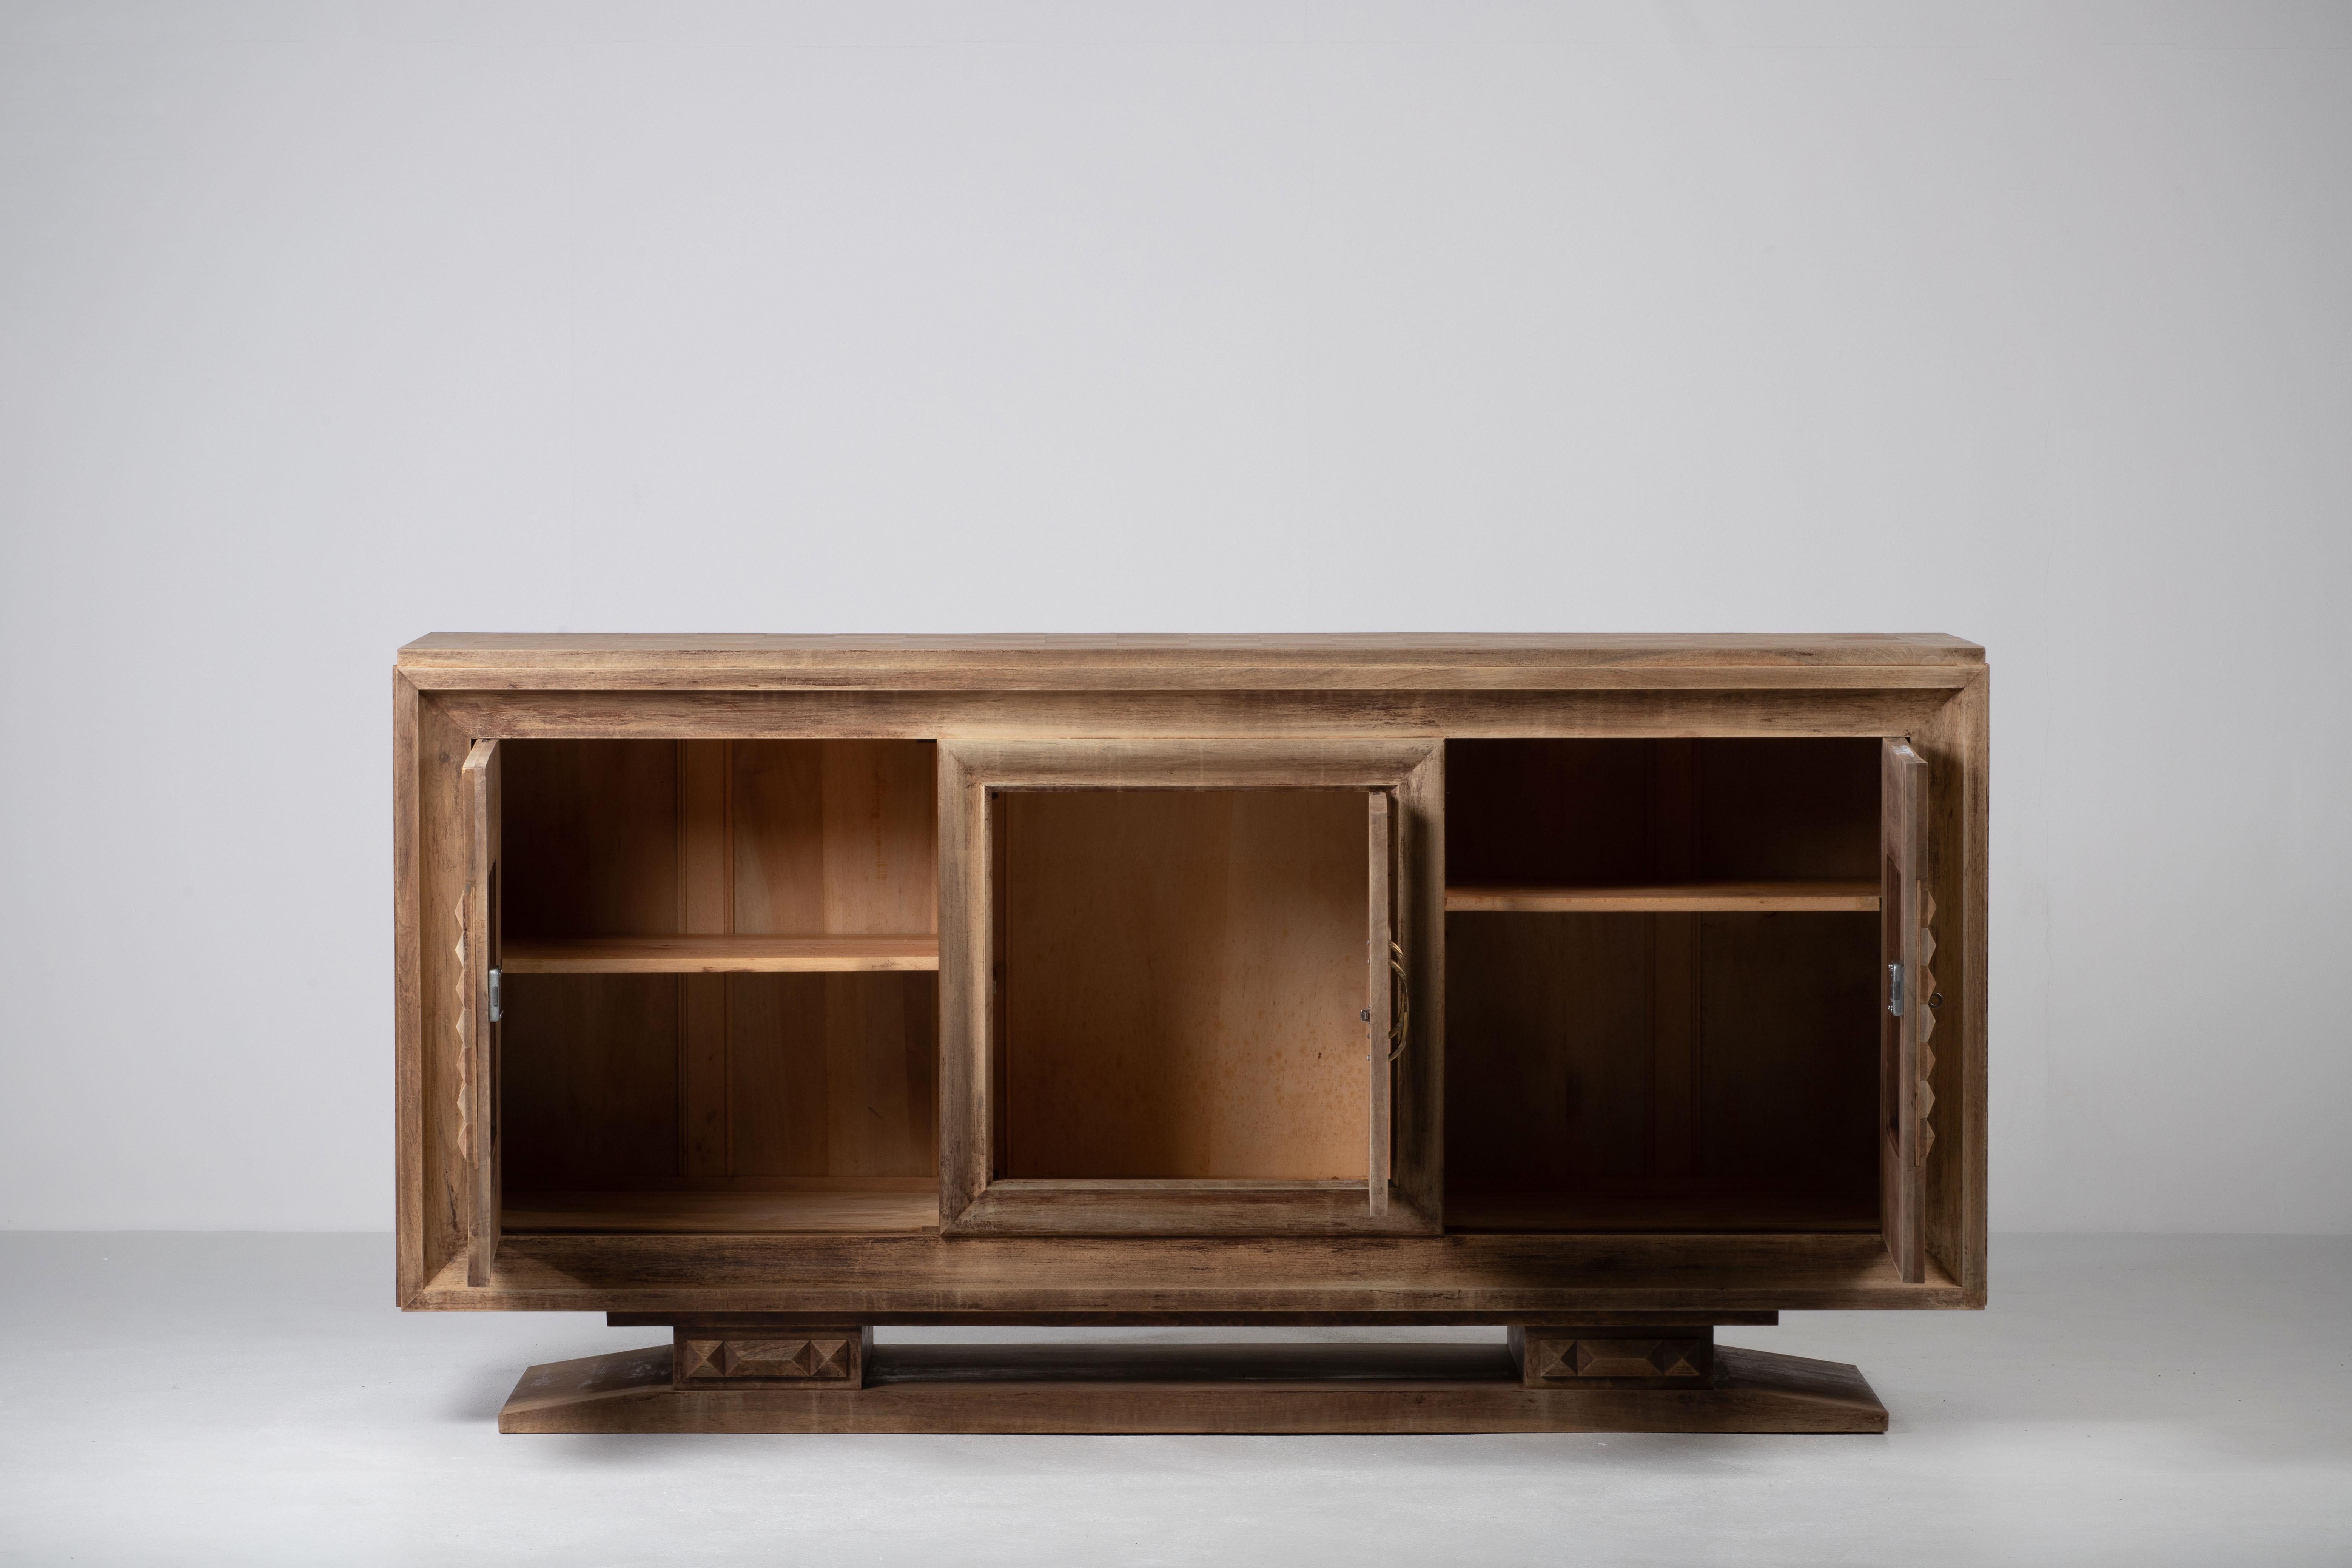 Credenza, solid oak, France, 1940s, after Charles Dudouyt.
Large Art Deco Brutalist sideboard. 
The credenza consists of three storage facilities and covered with very detailed designed door panels. 
The refined wooden structures on the doors